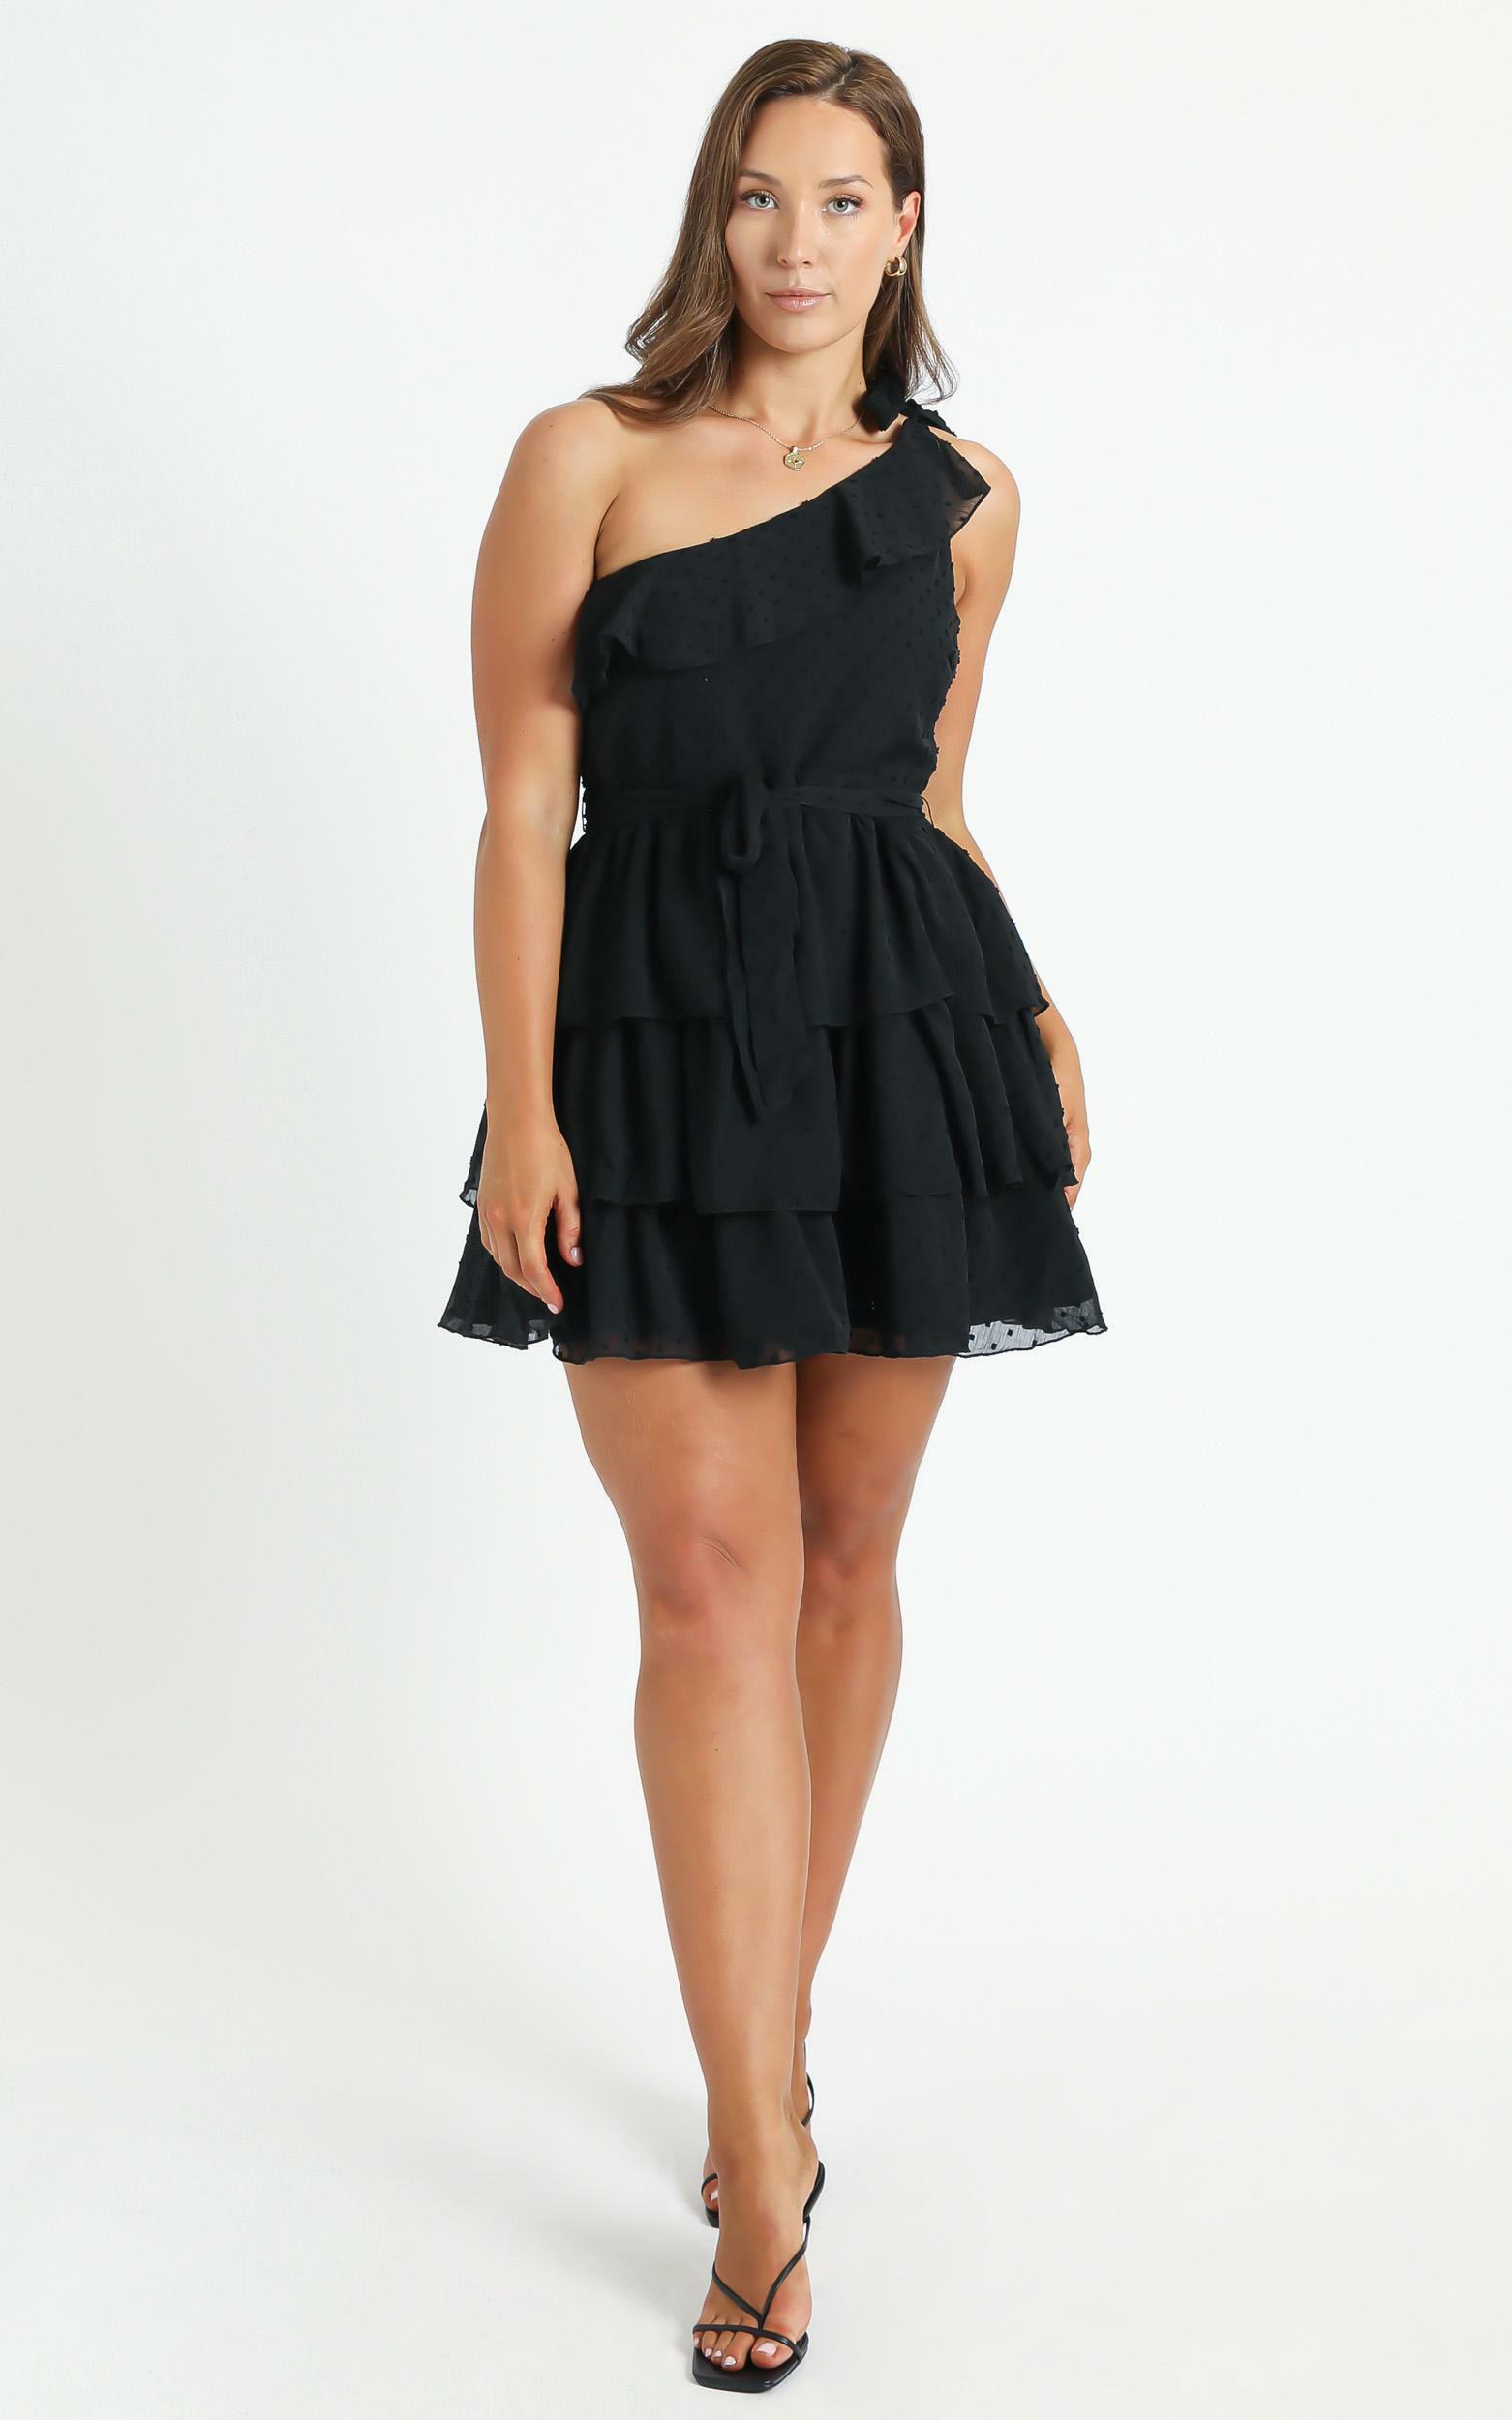 Darling I Am A Daydream One Shoulder Ruffle Mini Dress in Black - 20, BLK1, hi-res image number null